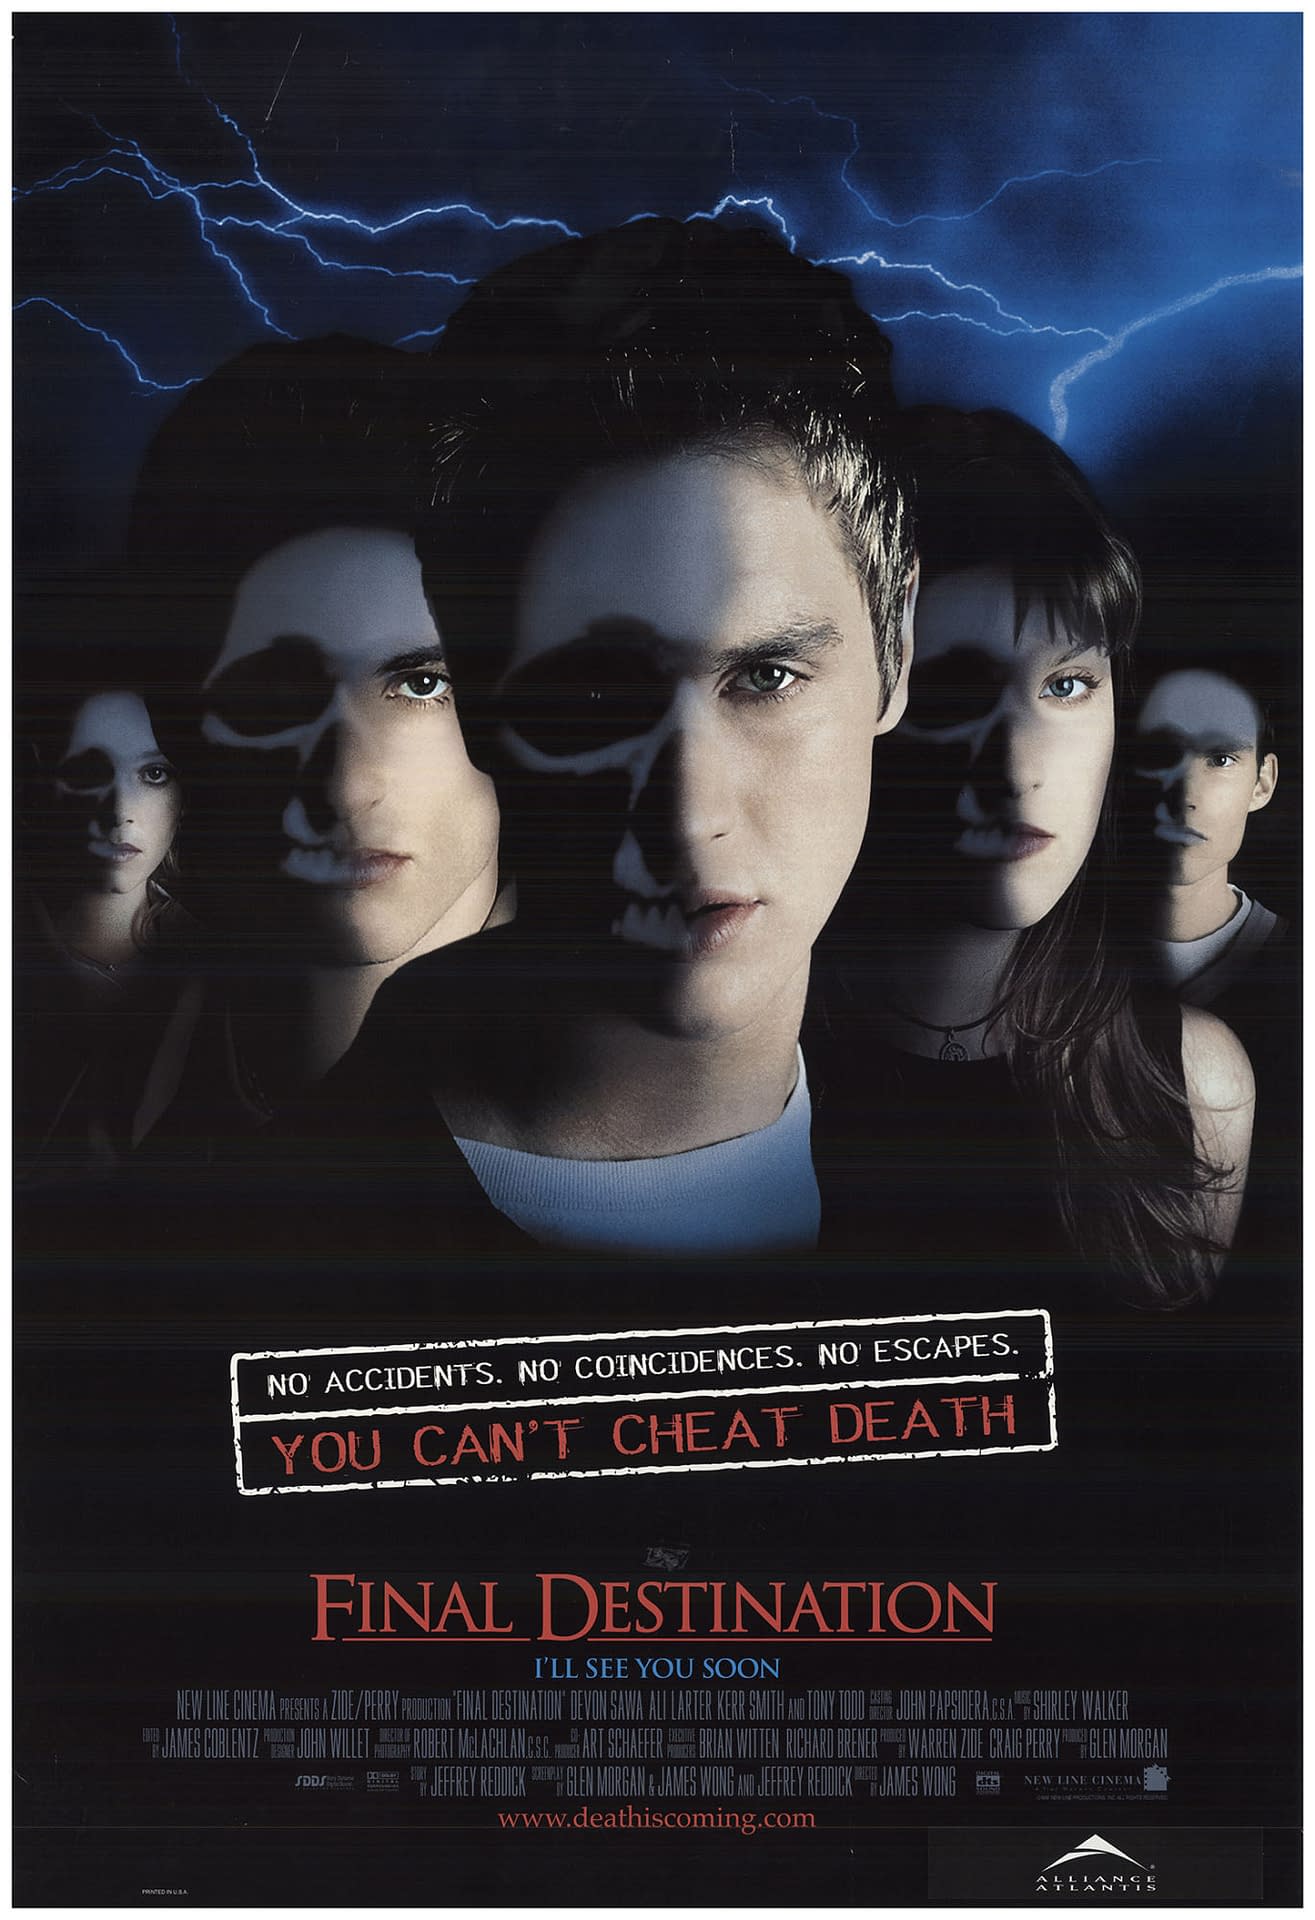 Final Destination New Film Coming To HBO Max, Jon Watts Producing